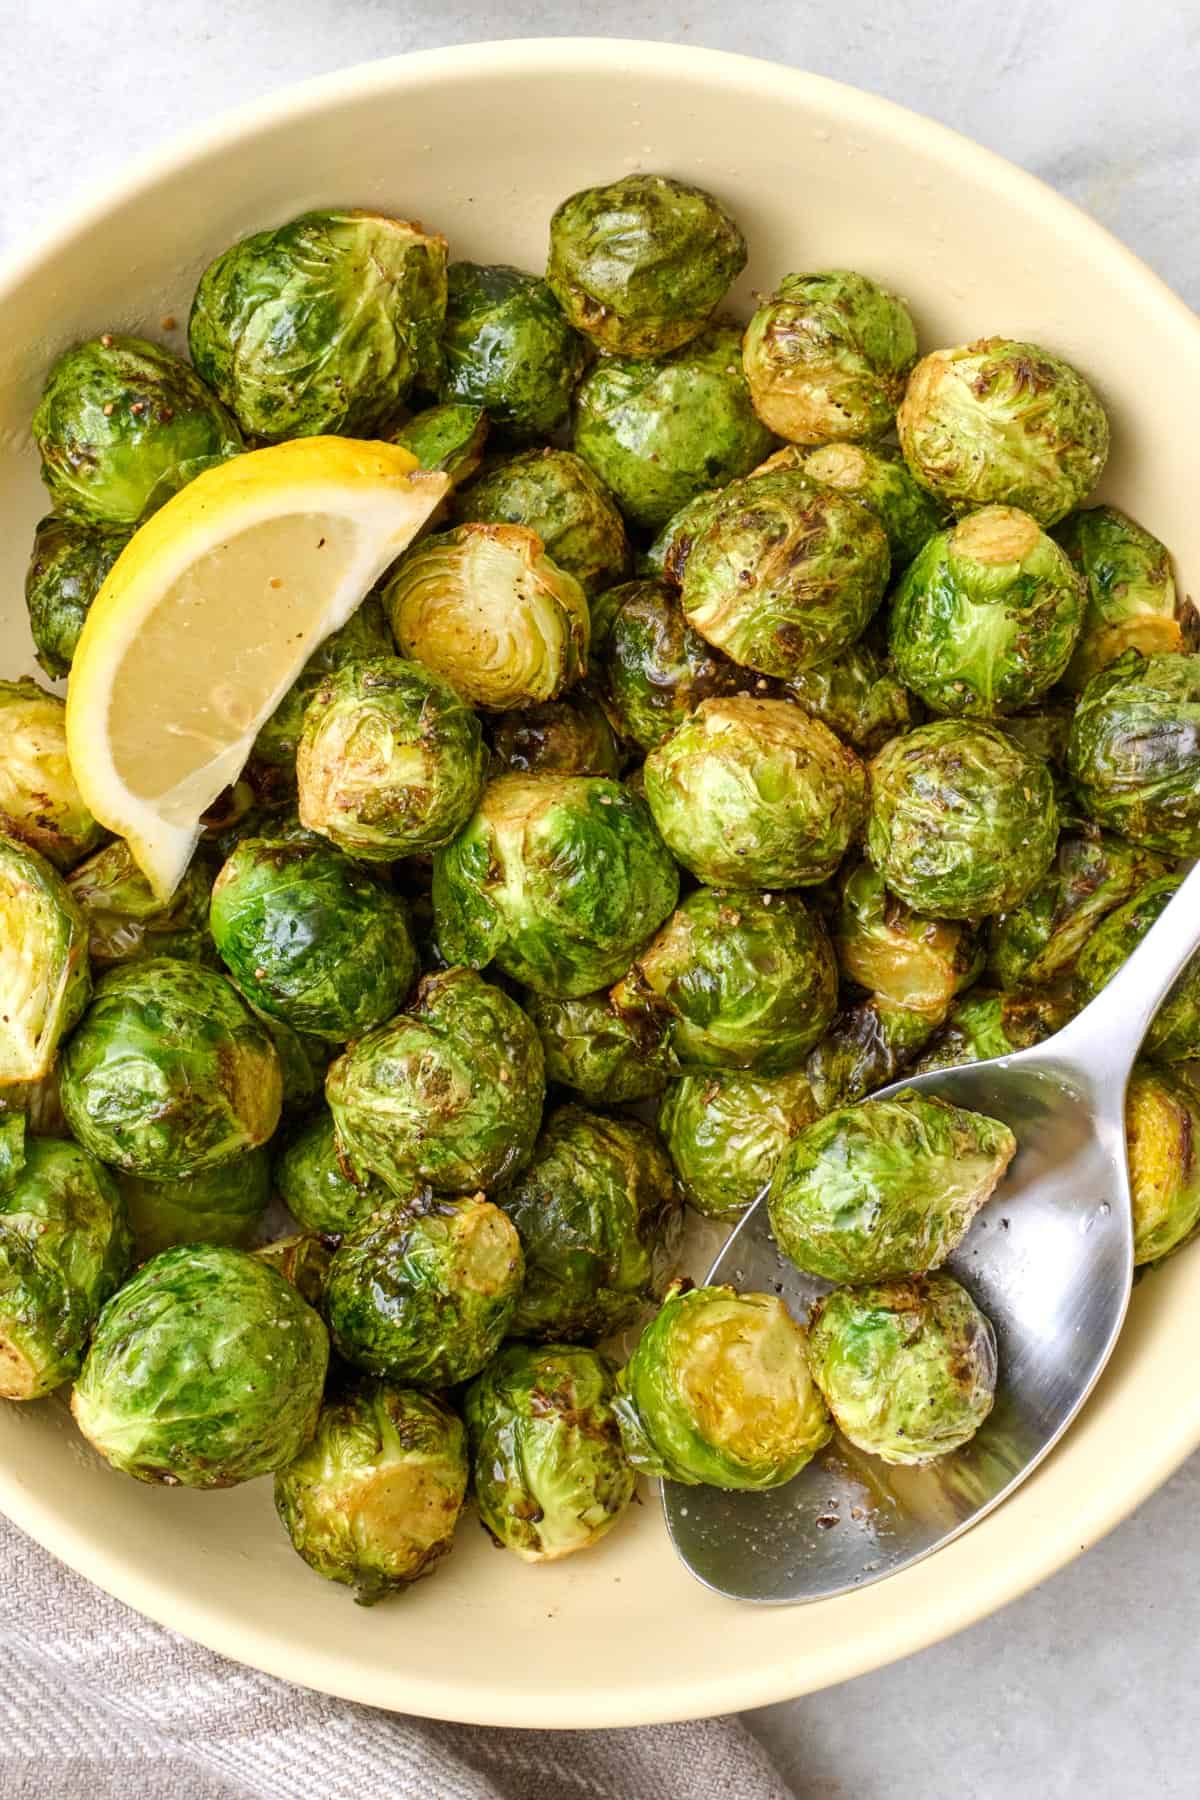 The air fried sprouts in the basket